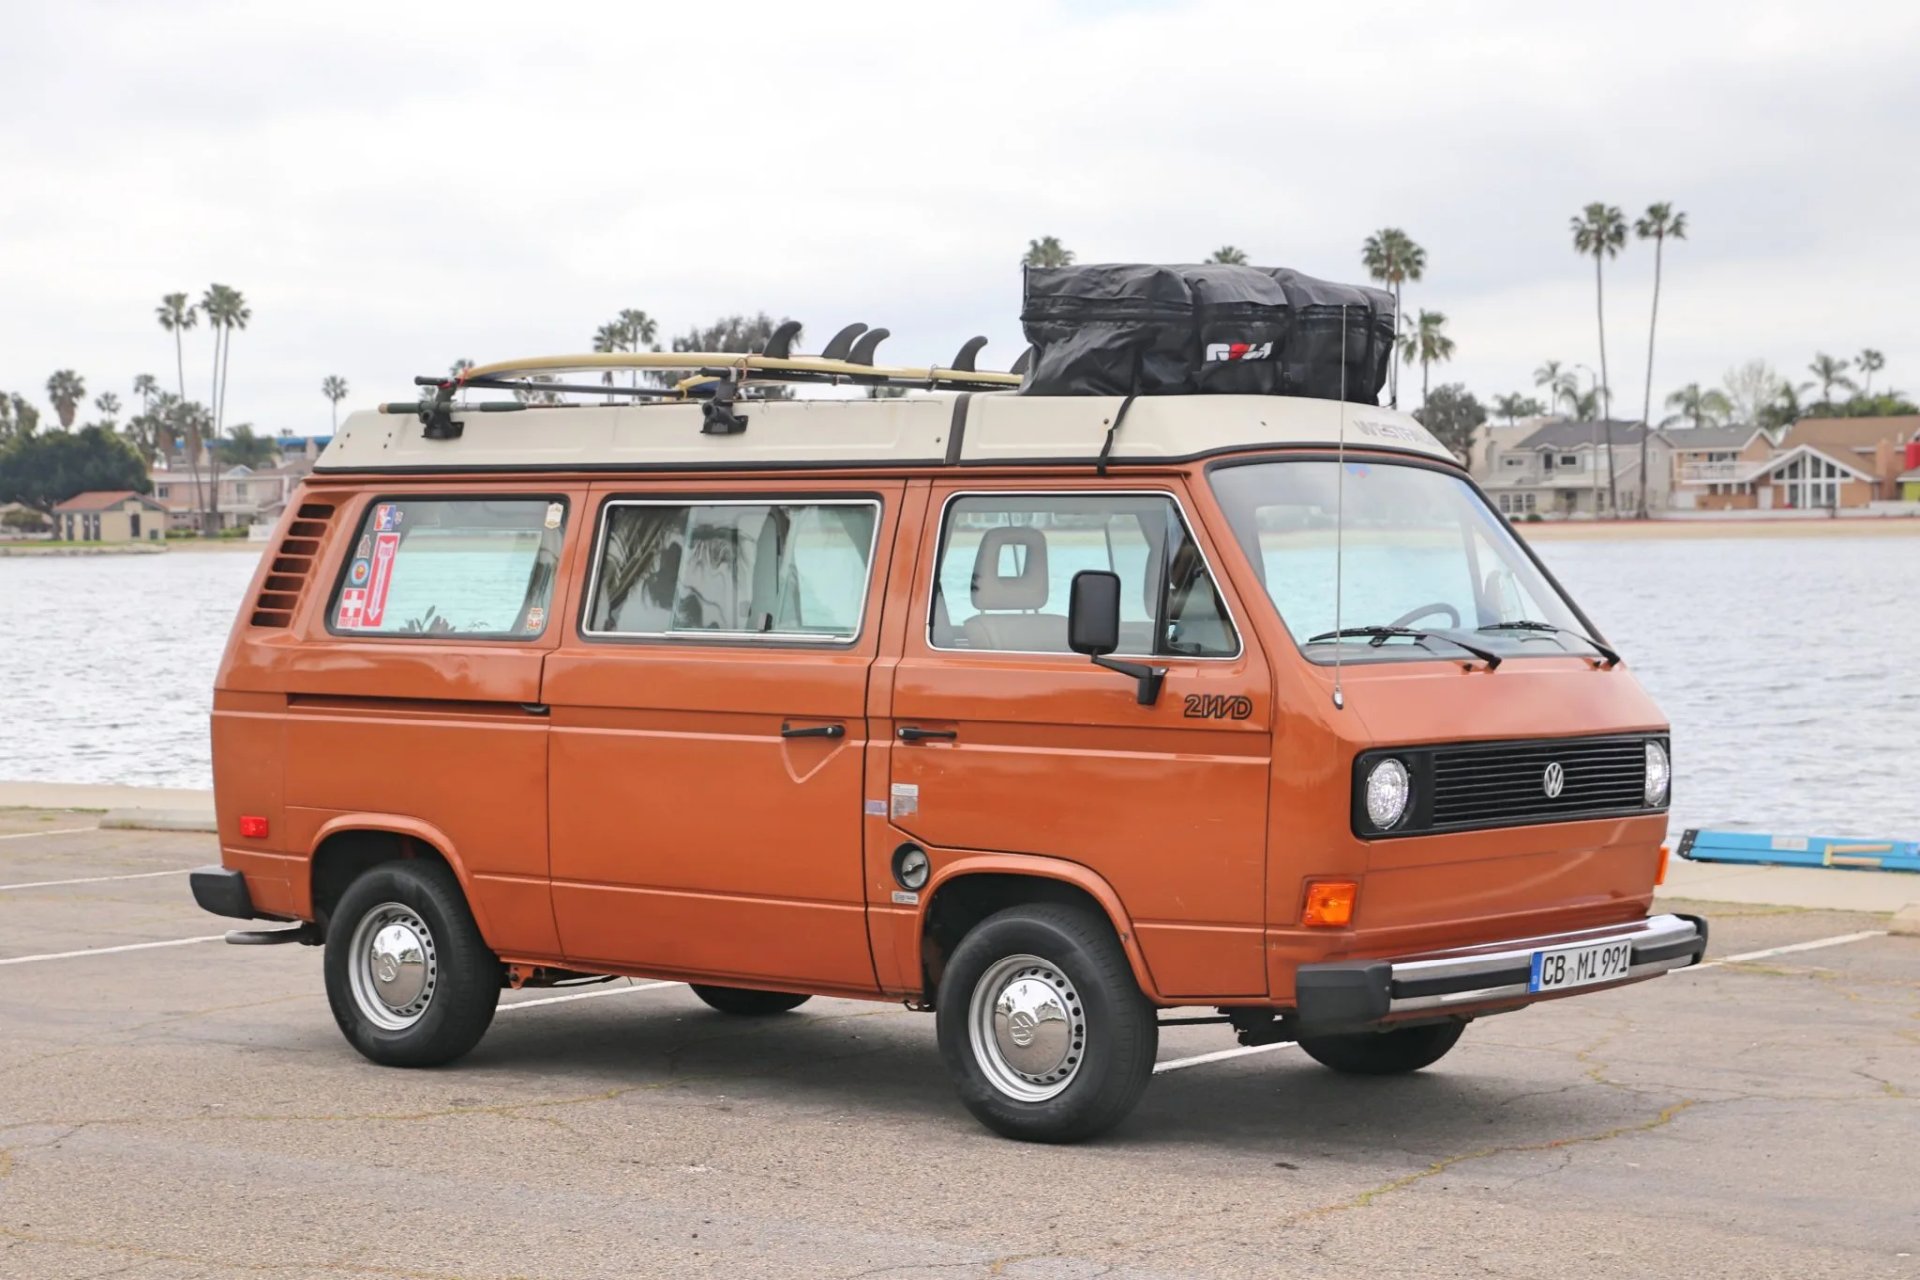 https://s1.cdn.autoevolution.com/images/news/cute-1980-volkswagen-vanagon-westfalia-is-everything-you-need-sells-with-no-reserve-184313_1.jpg